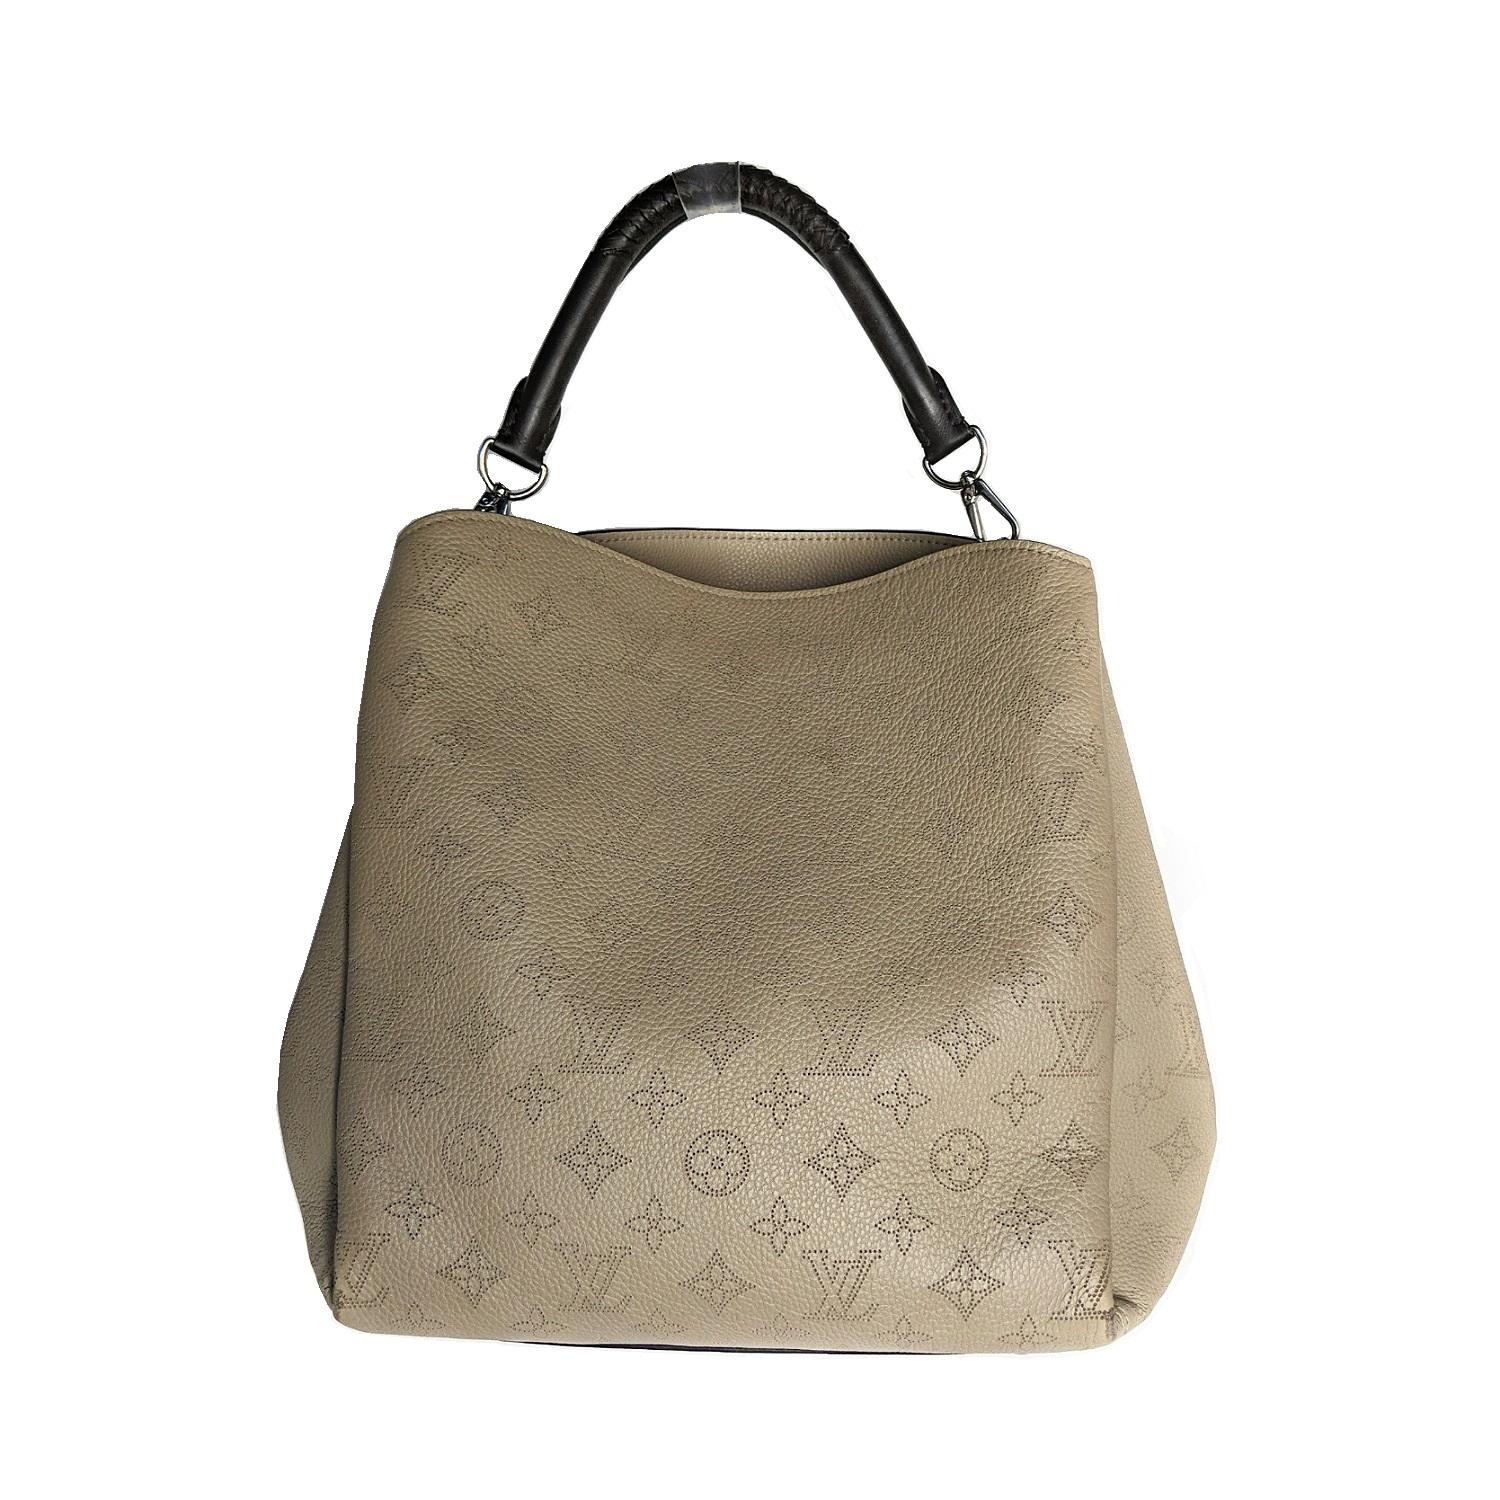 This is a tote that has a distinctive structure crafted of classic Louis Vuitton monogram in a beige leather. The short brown leather braided trim top handle is accompanied by an optional beige leather long shoulder strap. The top is open to an